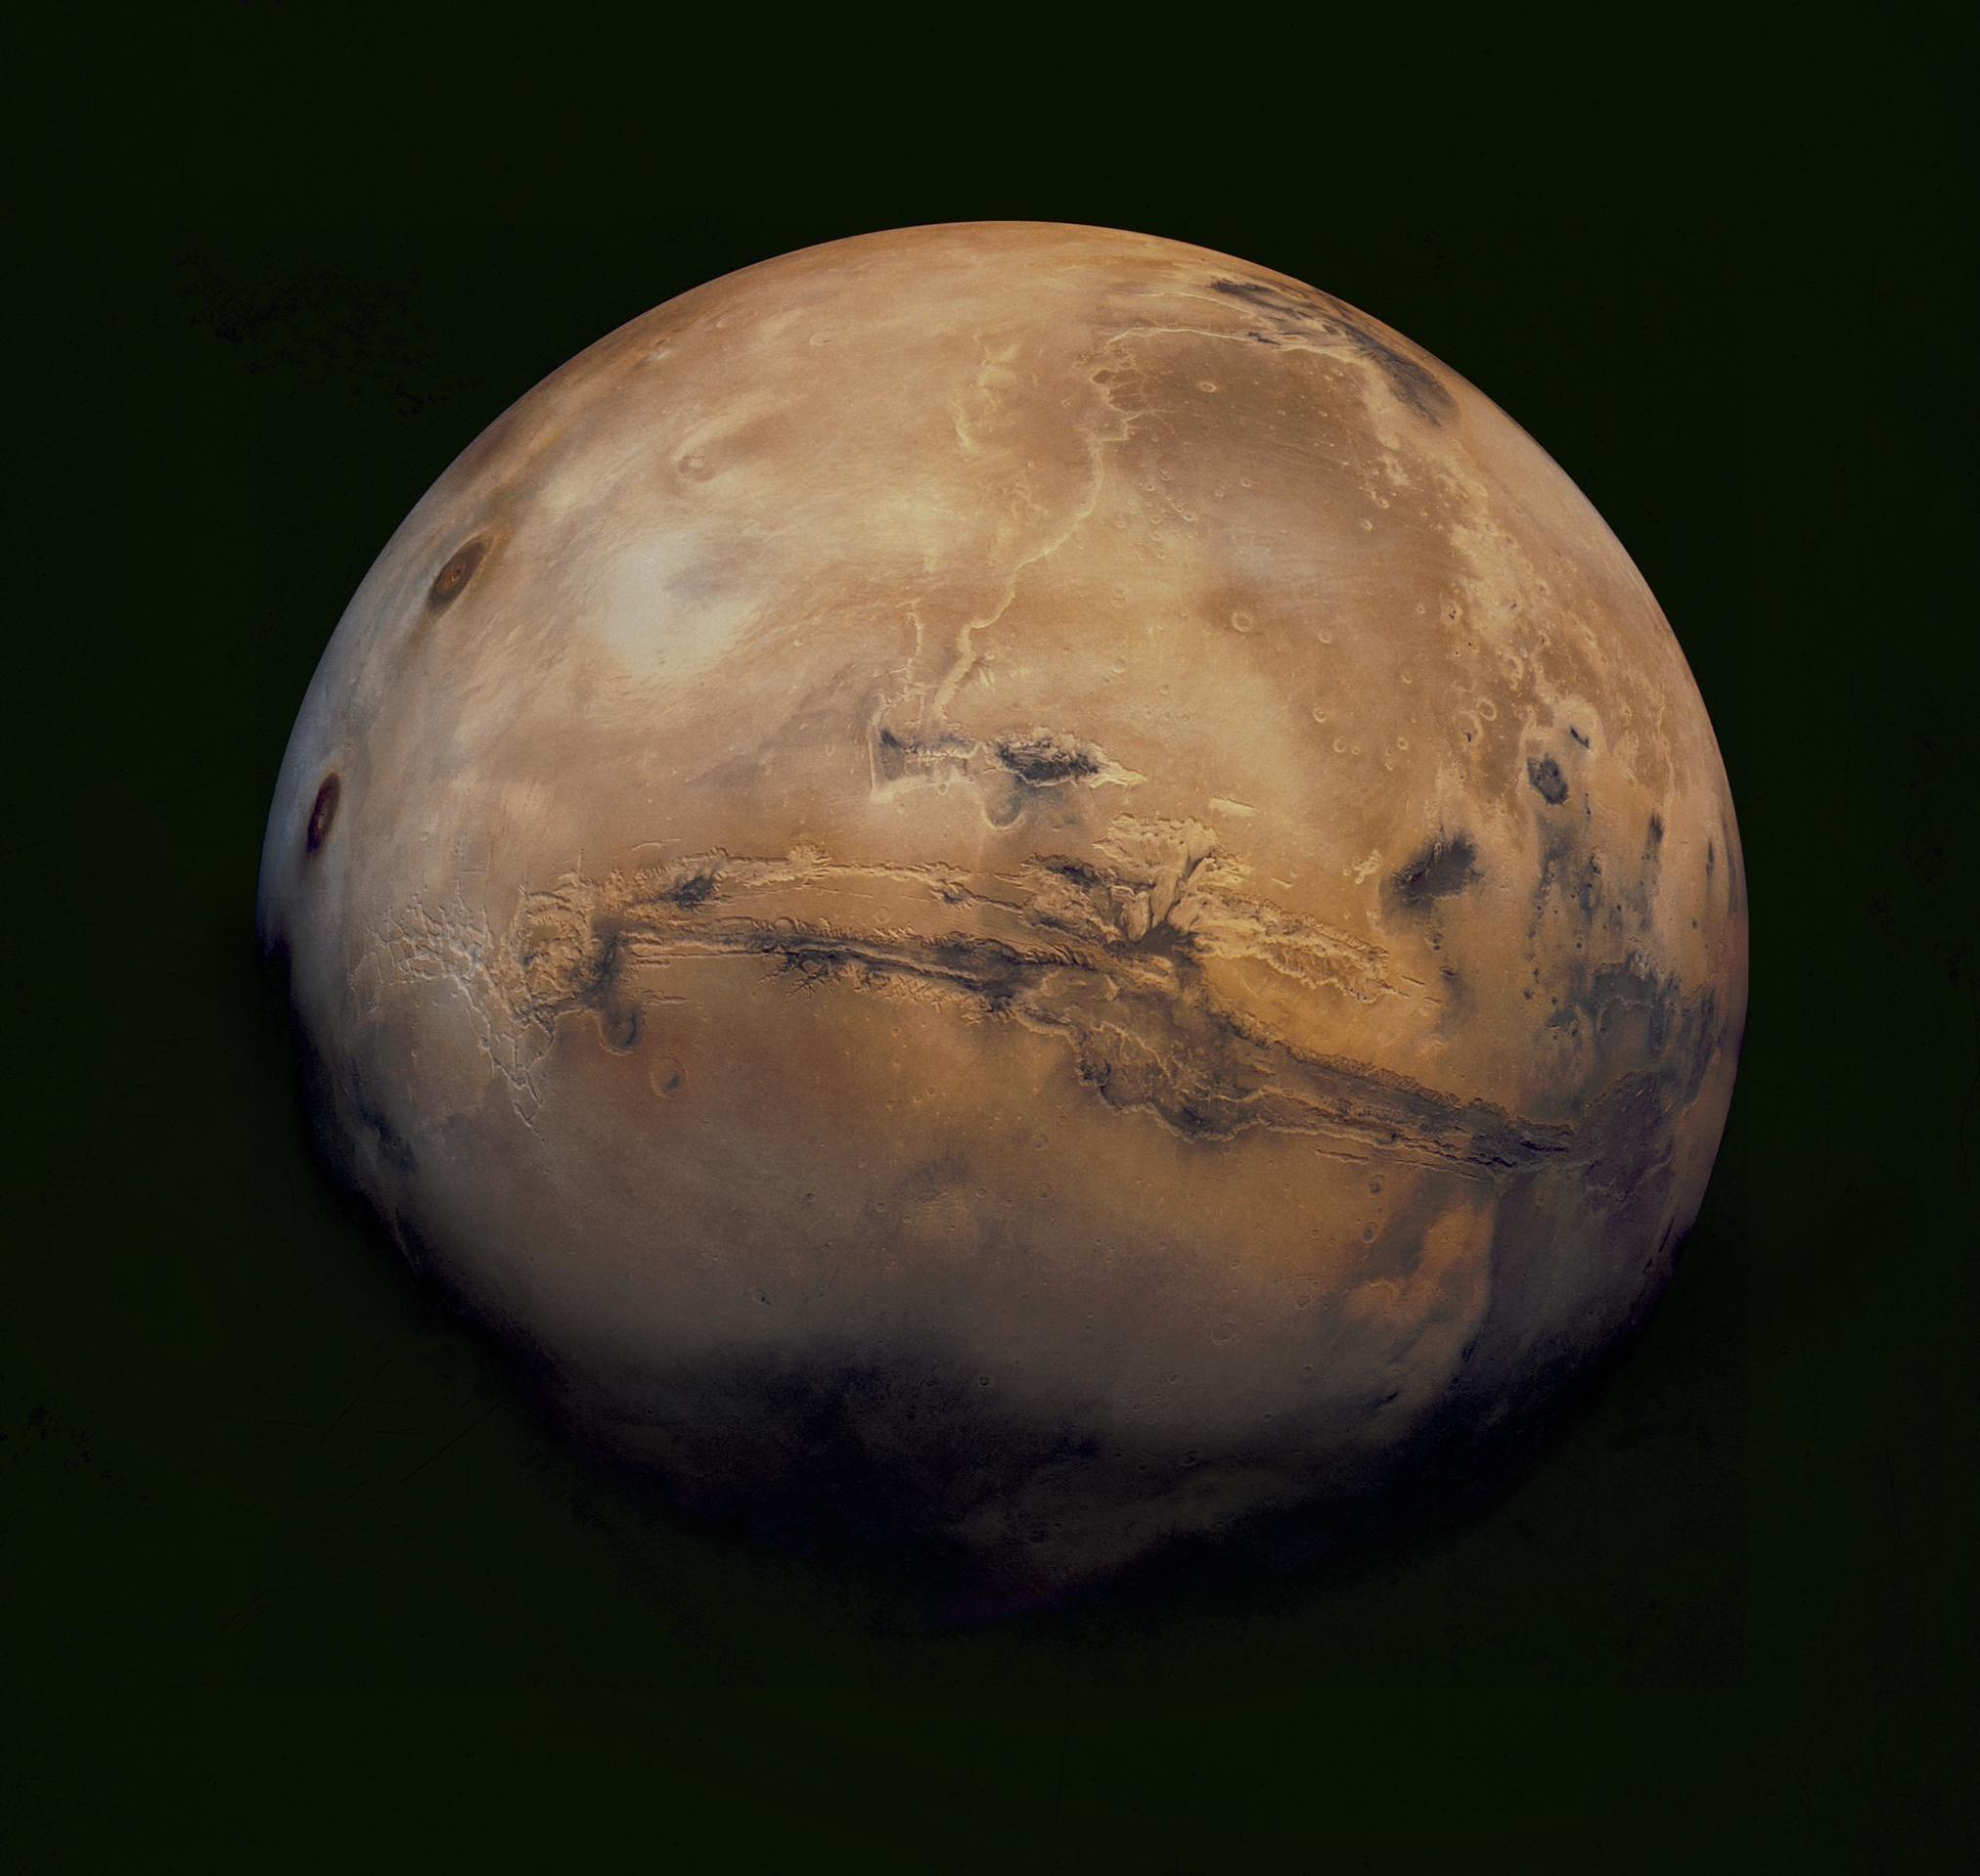 A view of Mars showing a large crater across the middle of the red planet.